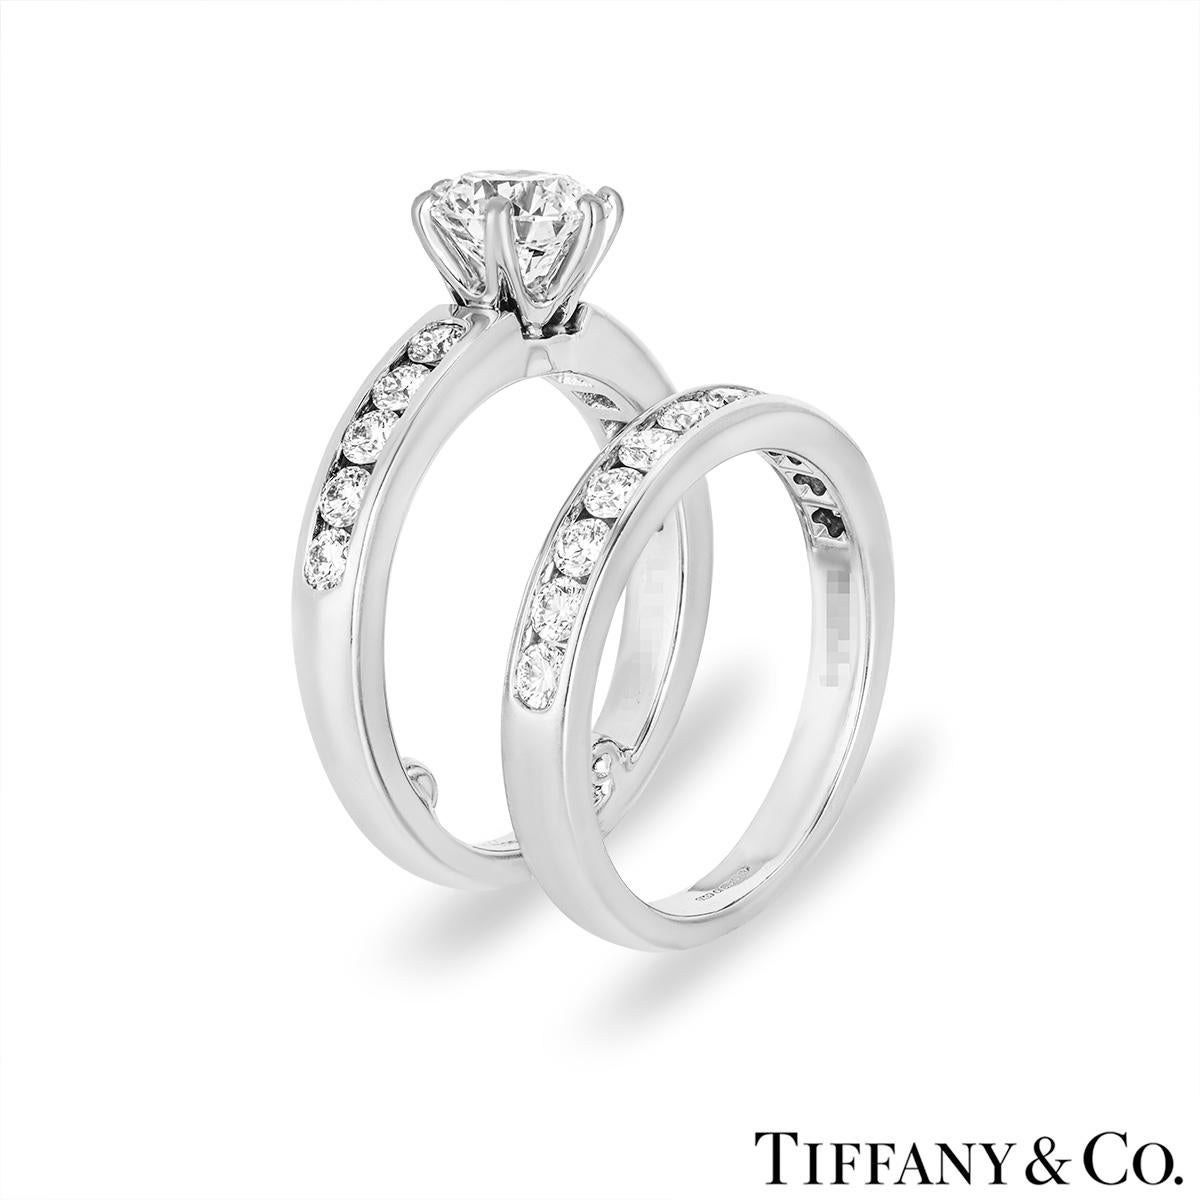 A beautiful platinum diamond bridal set by Tiffany & Co. The engagement ring is set to the centre in a six-prong mount with a round brilliant cut diamond weighing 1.03ct, H colour and VS1 clarity. The centre diamond is further complemented with 10